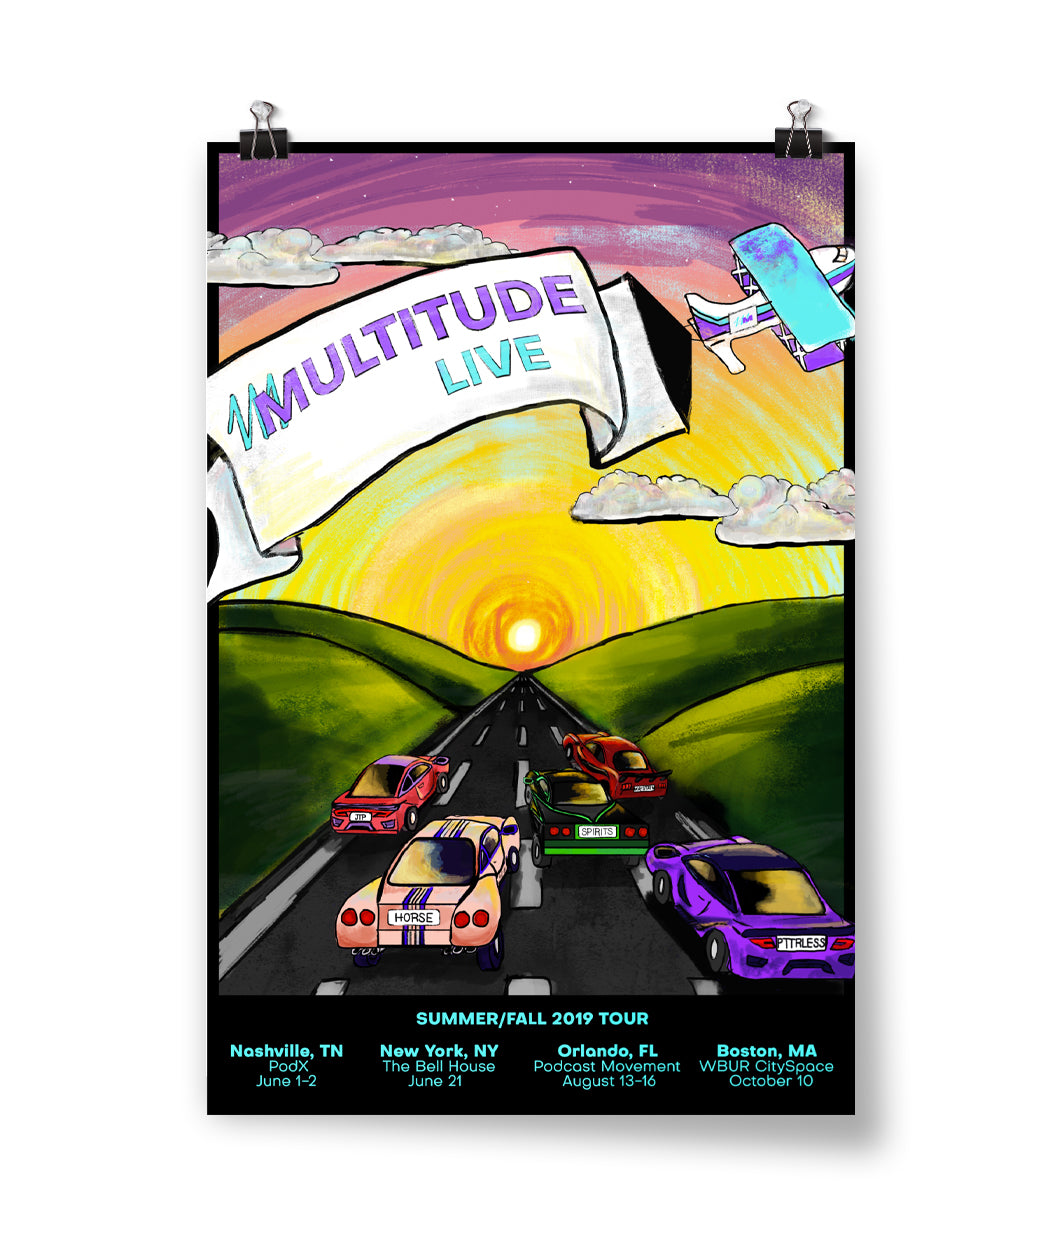 A poster that says "Multitude Live" on a banner being pulled by an airplane. Cars drive down a road towards a sunny horizon. The bottom lists dates and locations for the "Summer/Fall 2019 Tour".